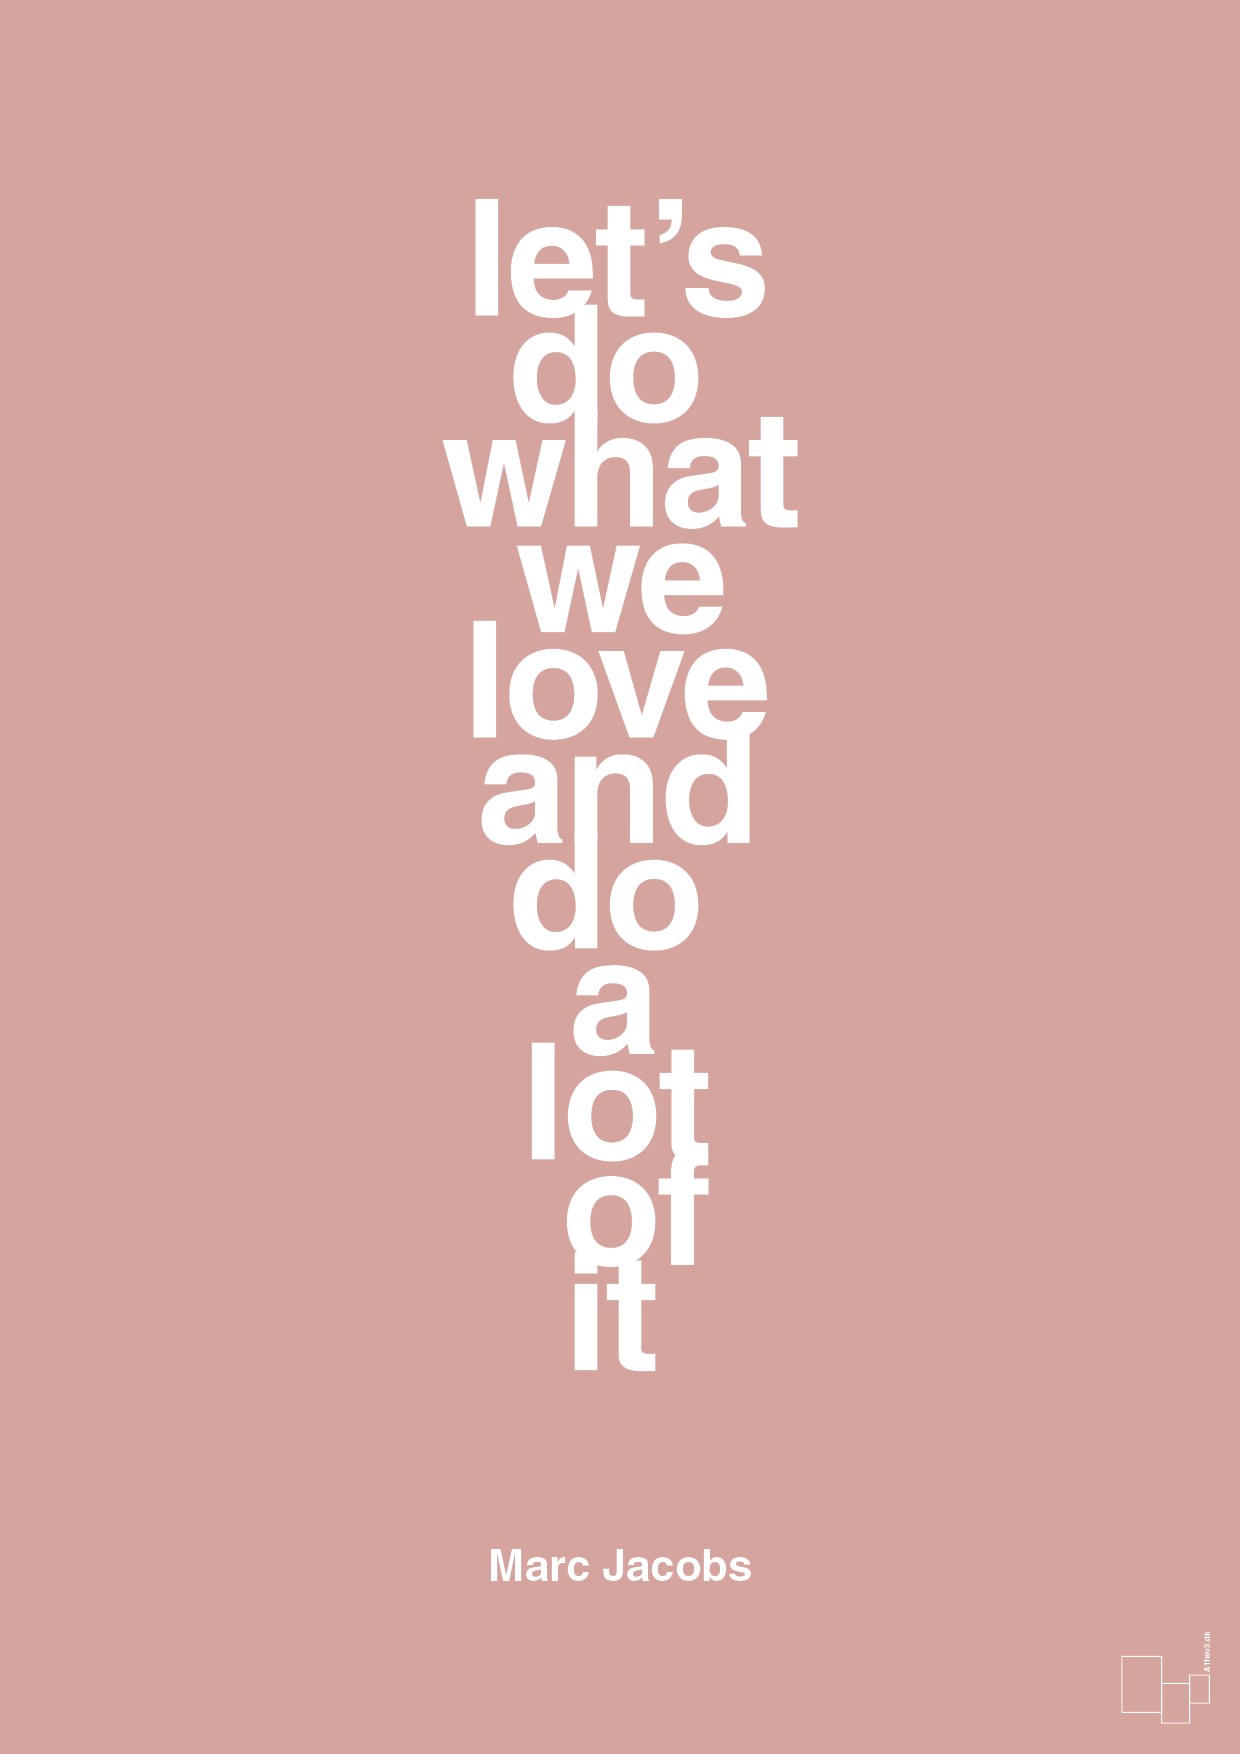 lets do what we love and do a lot of it - Plakat med Citater i Bubble Shell